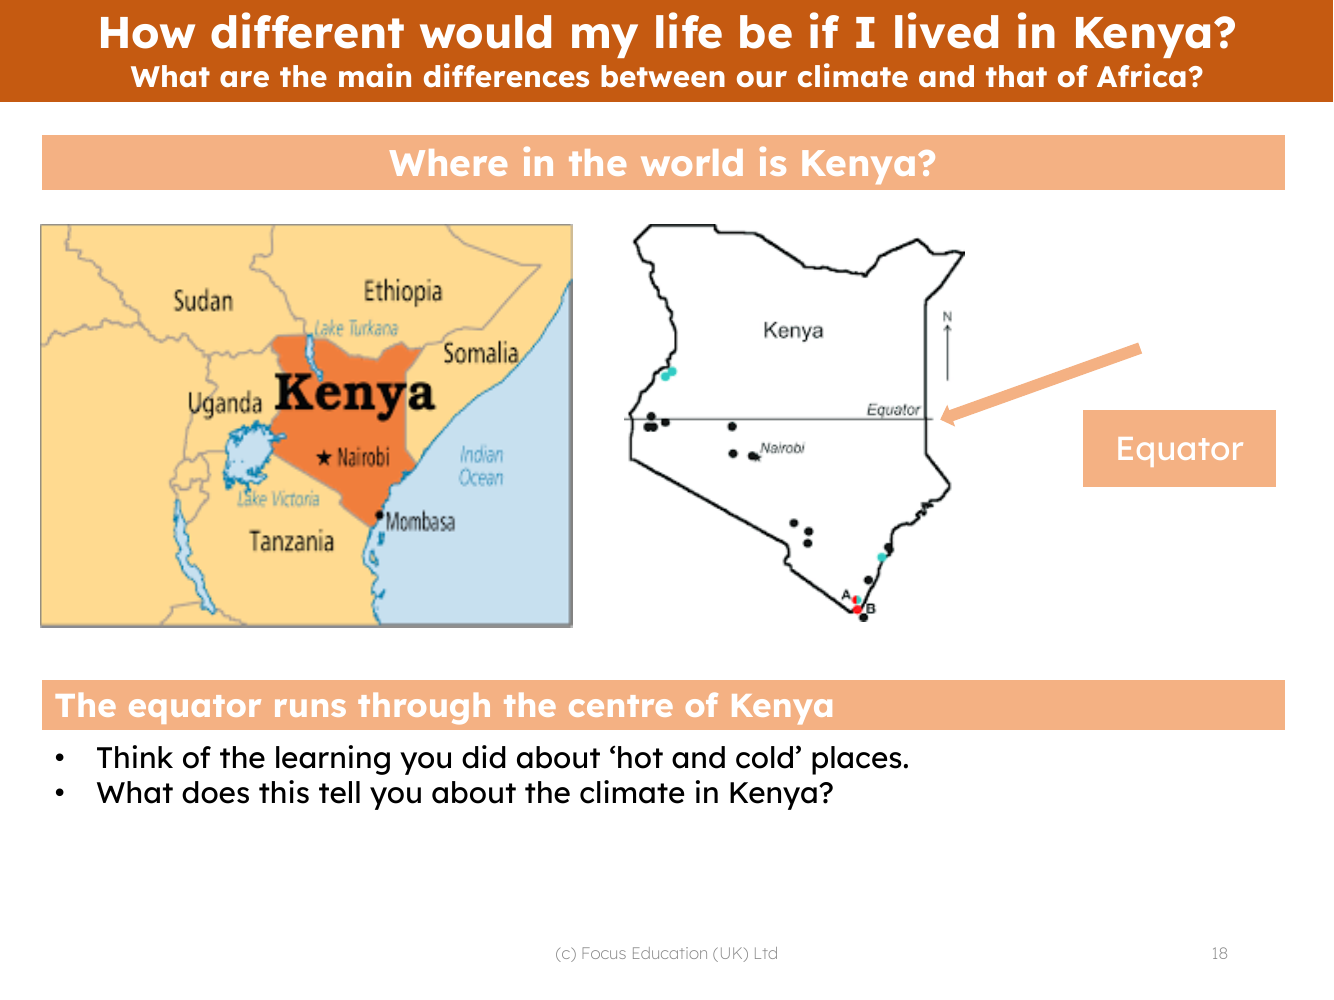 Where in the world is Kenya?